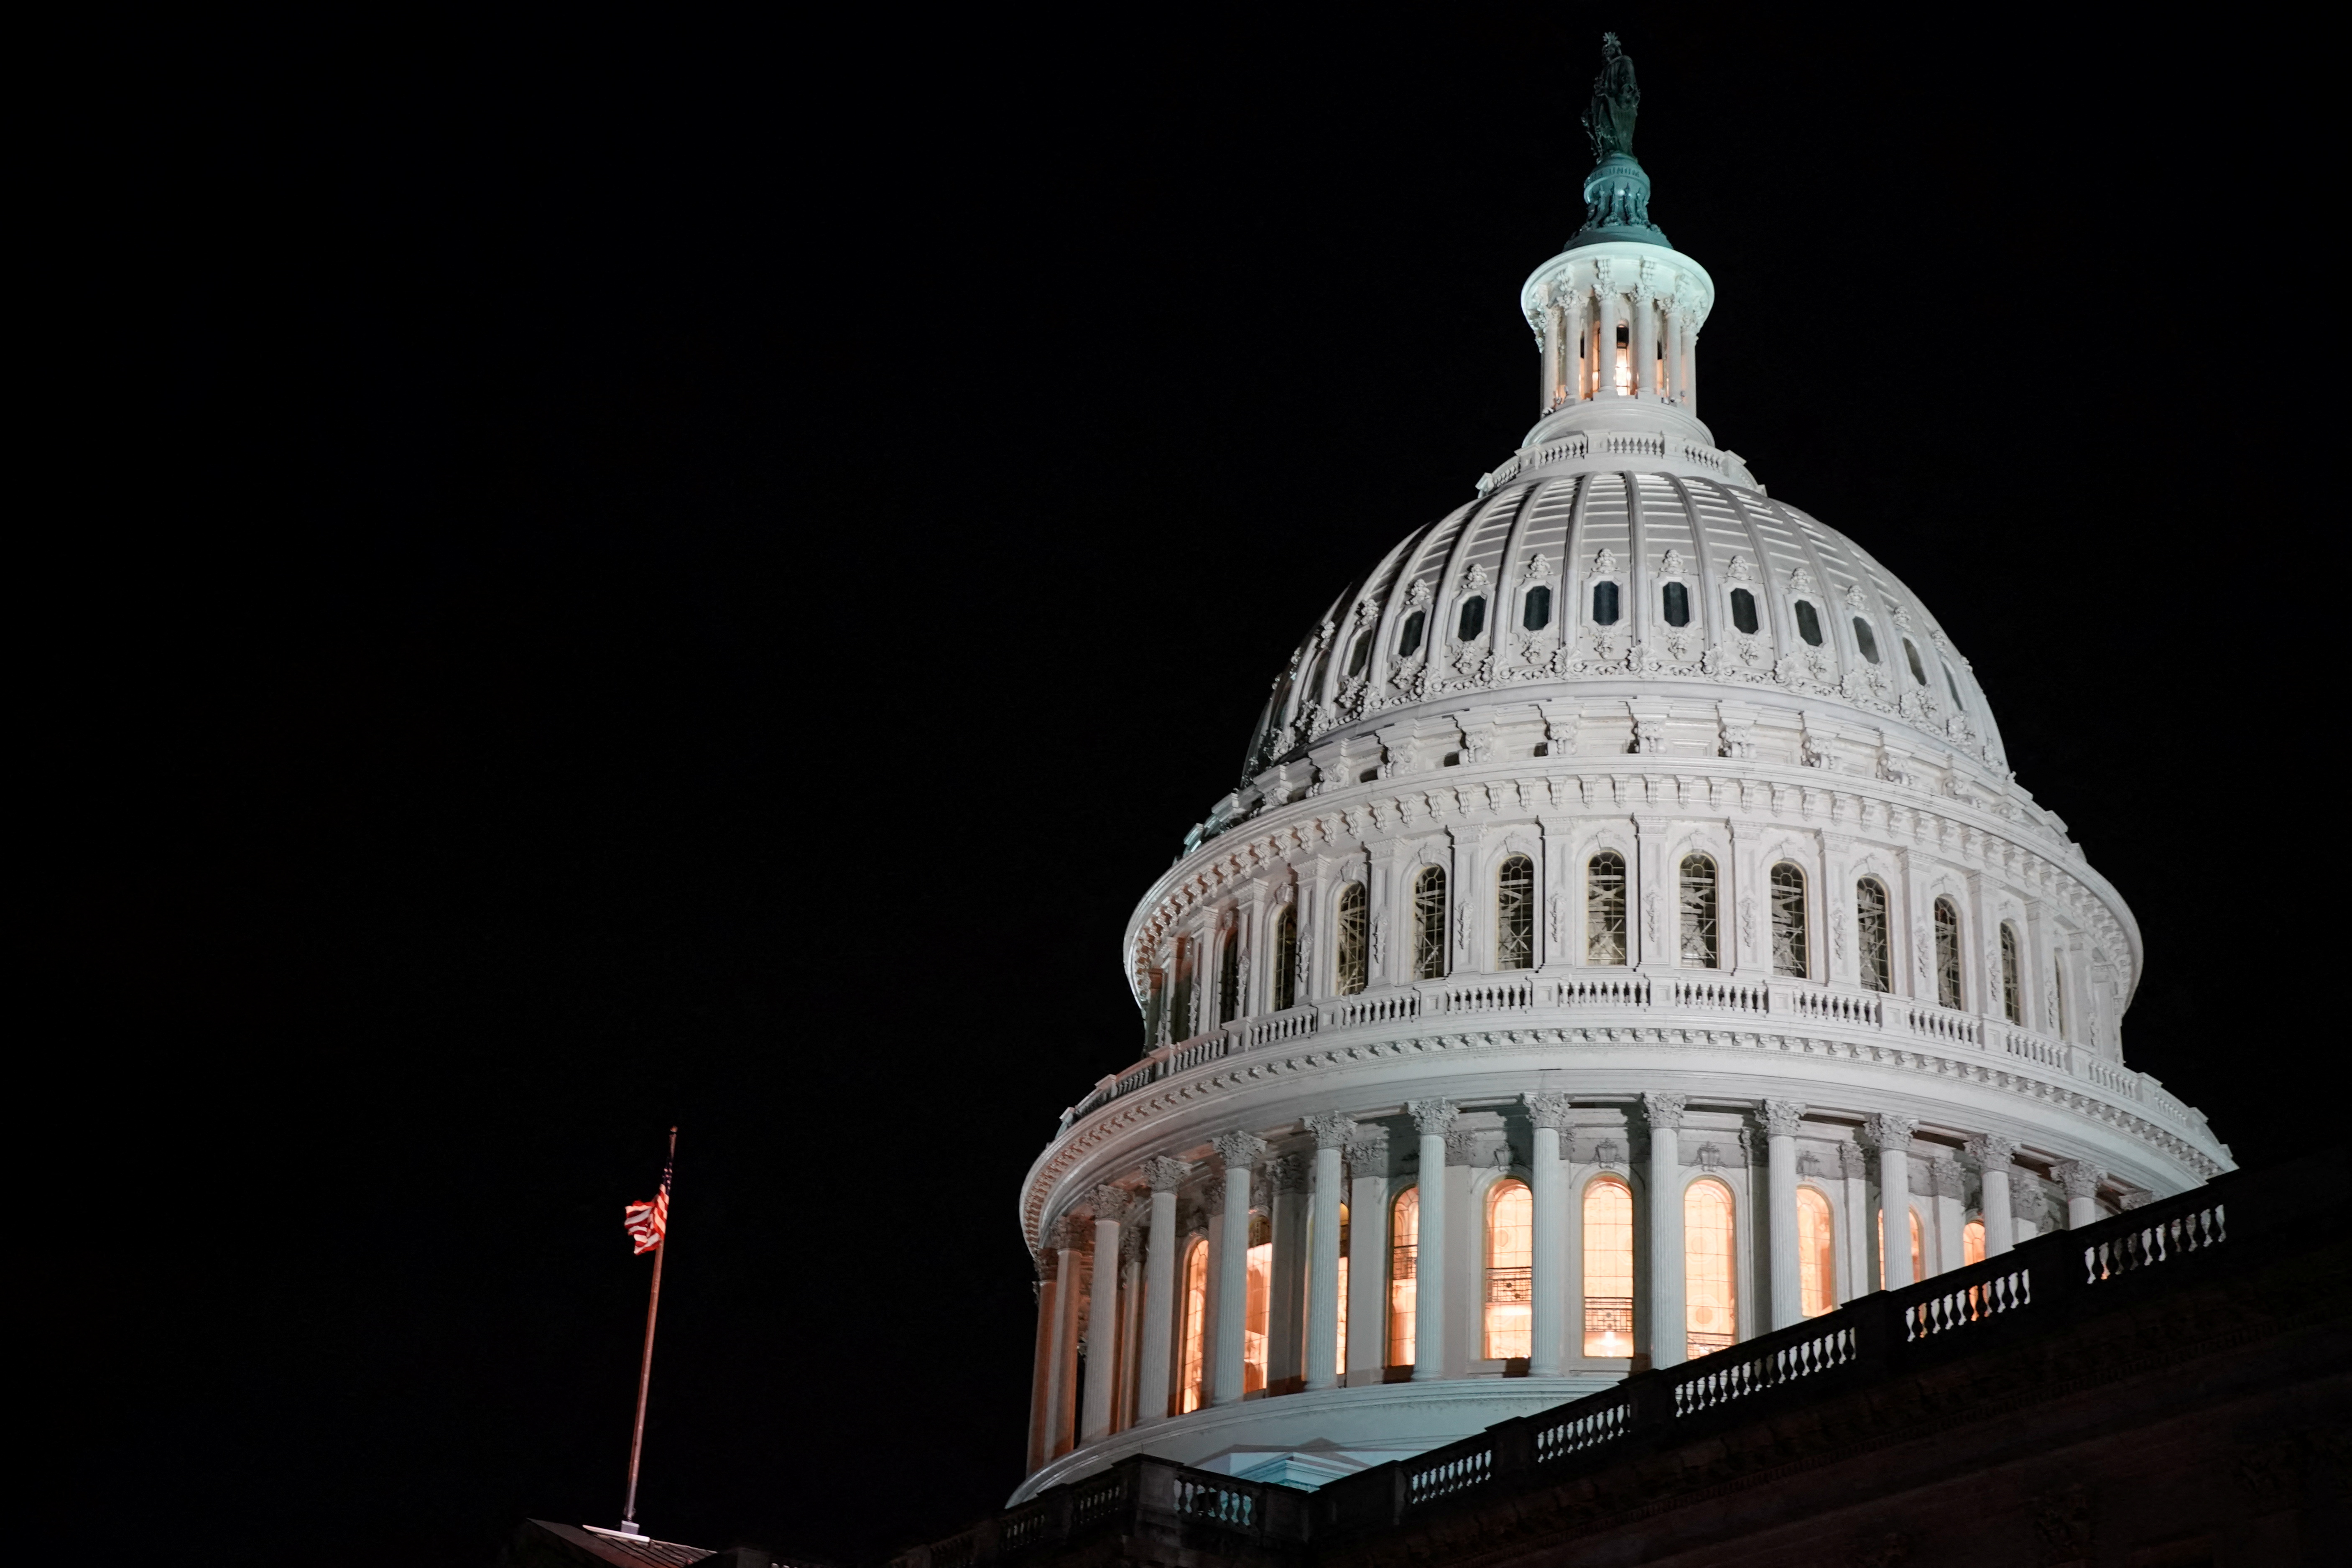 The U.S. Capitol dome is seen at night in Washington